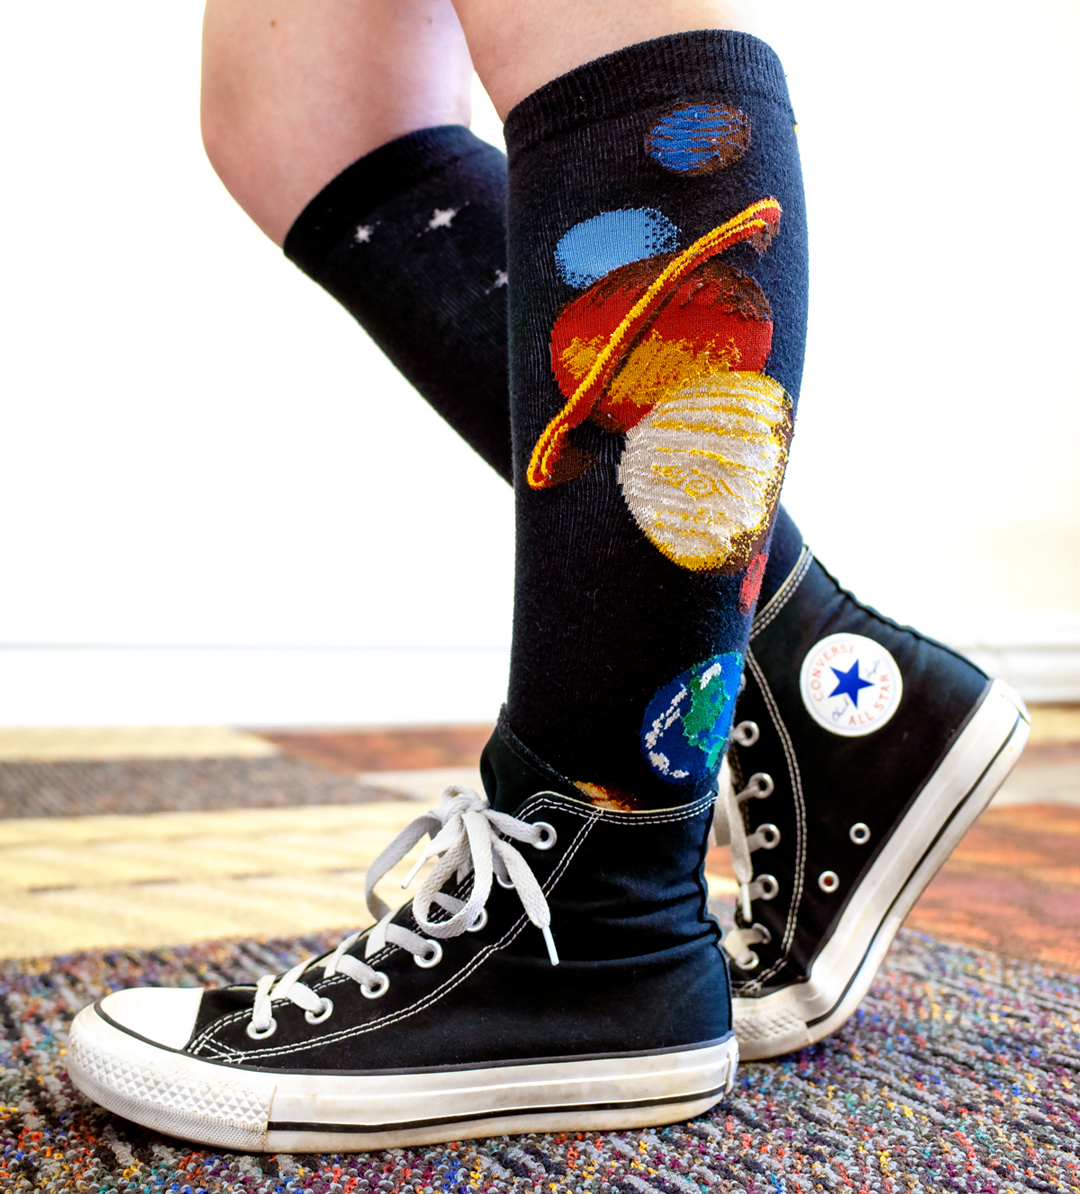 socks with converse high tops